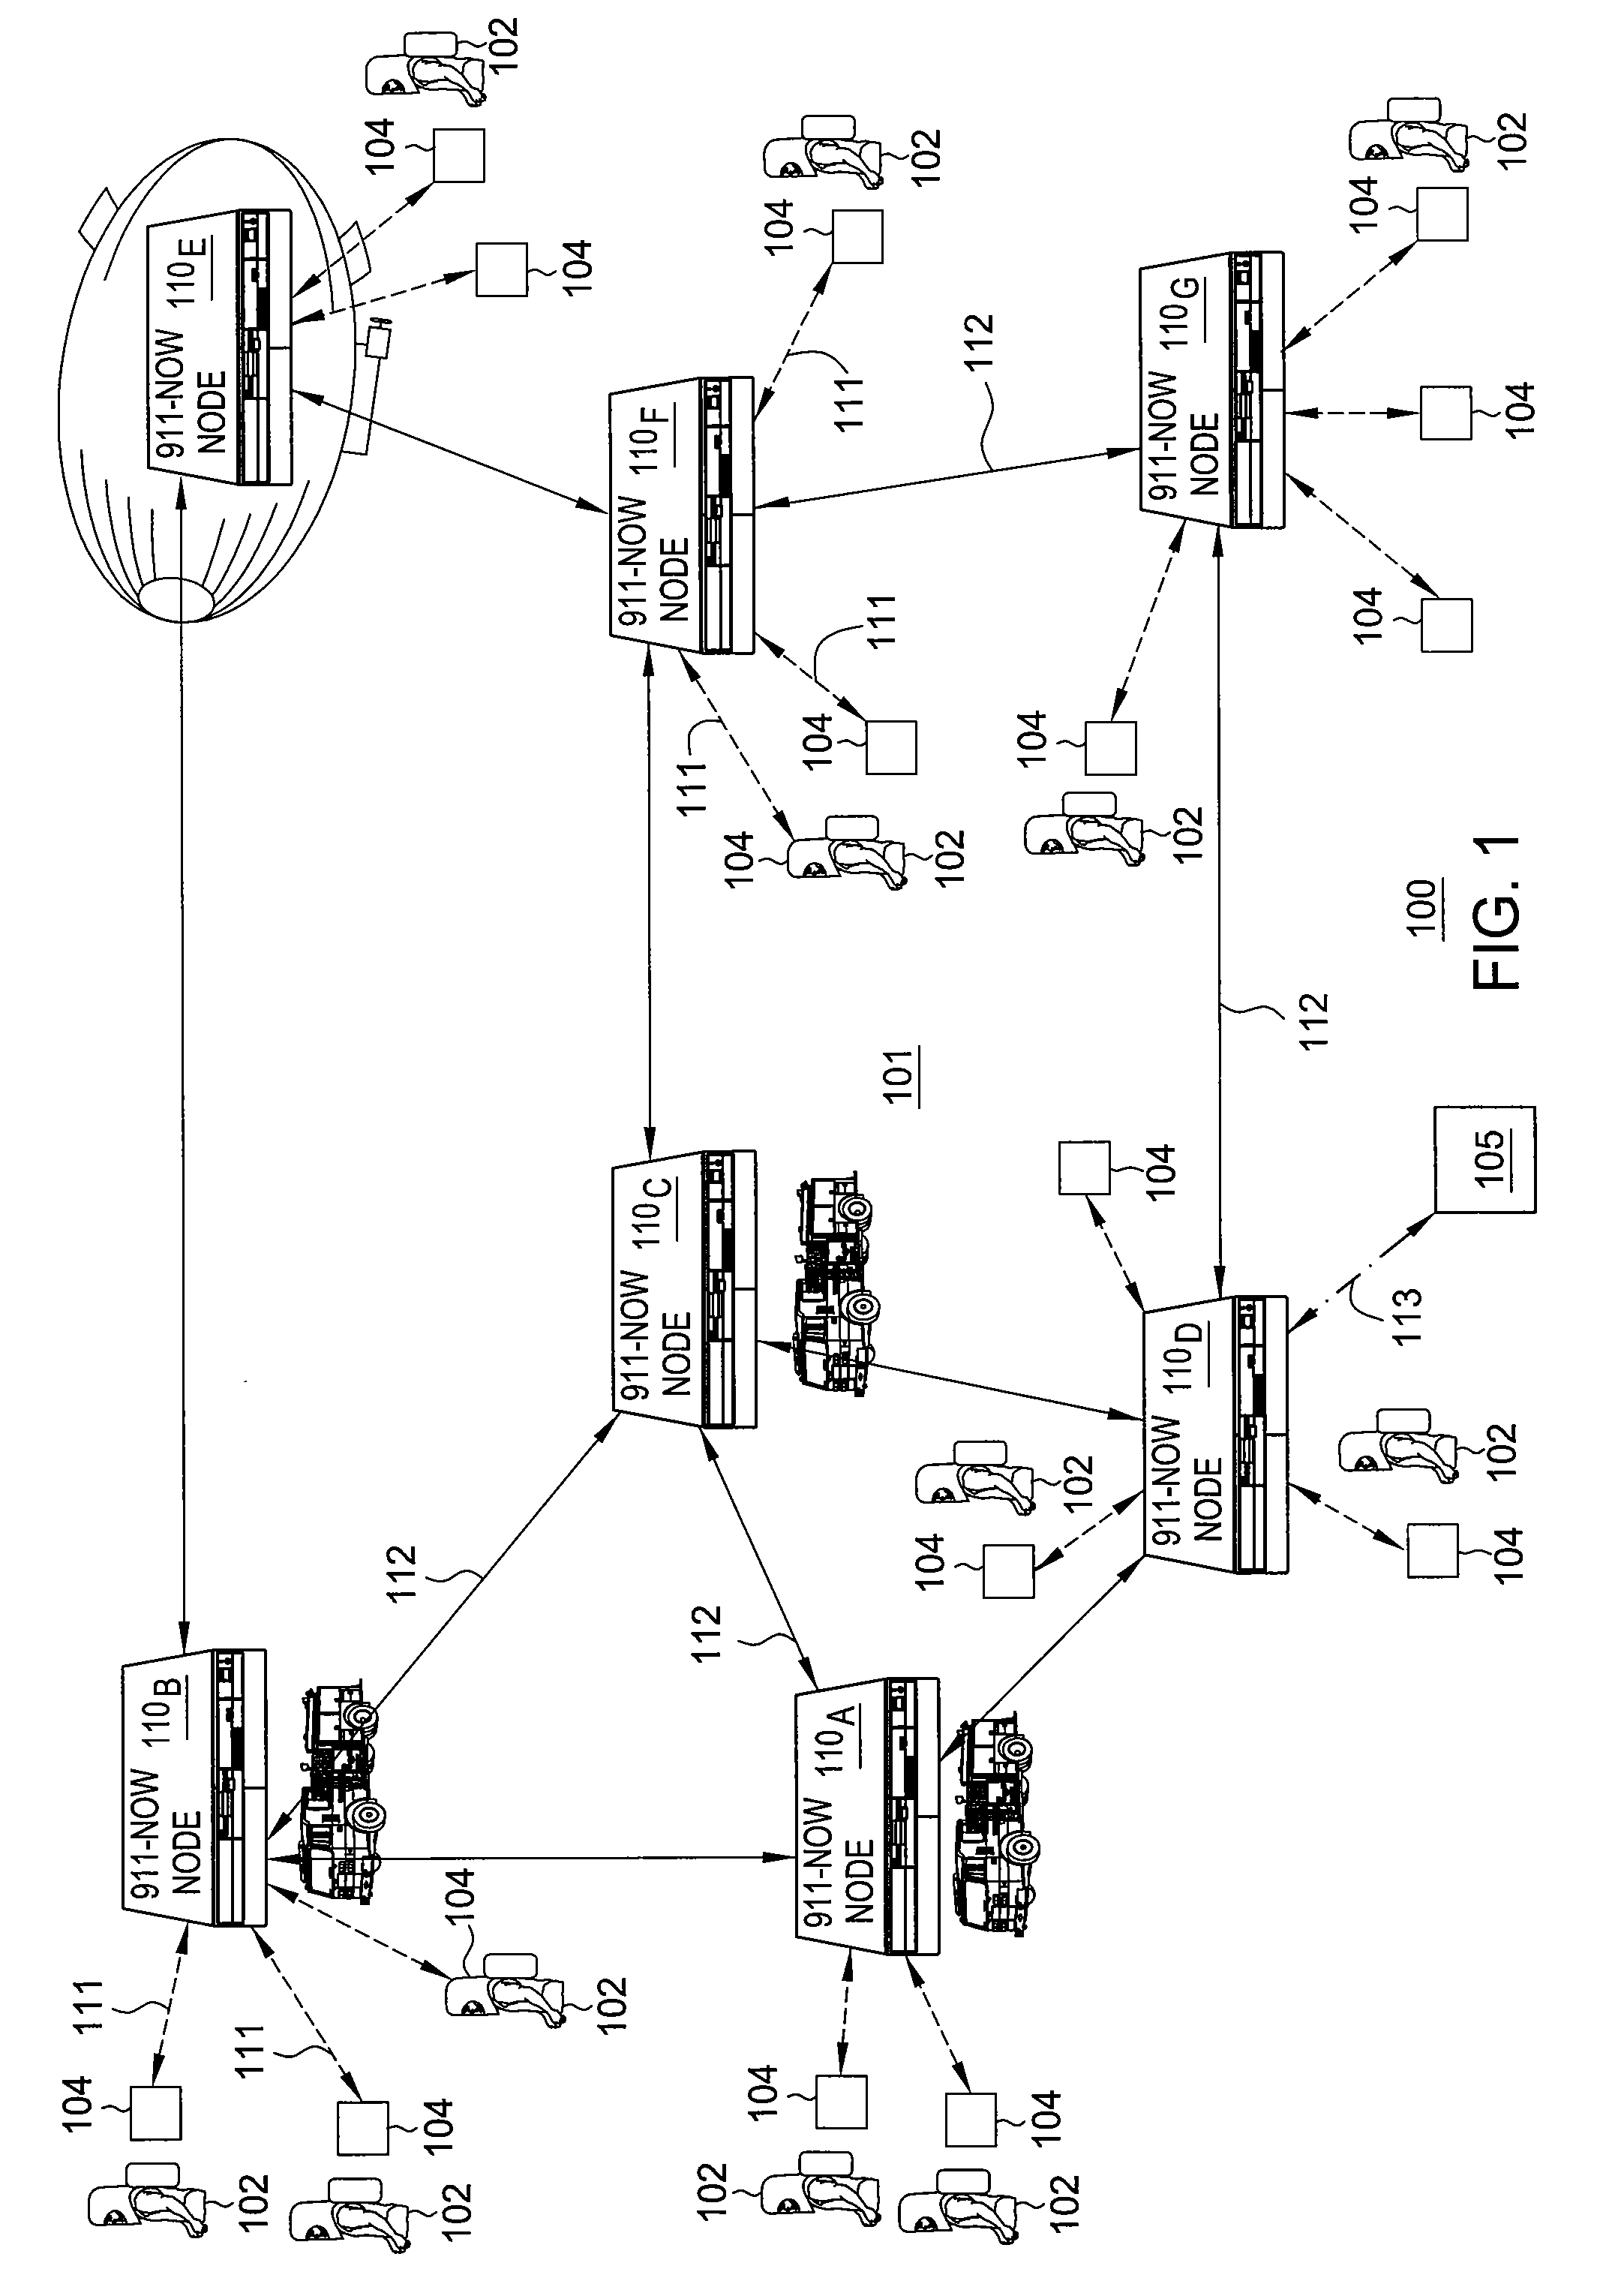 Method and Apparatus for Dynamically Creating and Updating Base Station Neighbor Lists